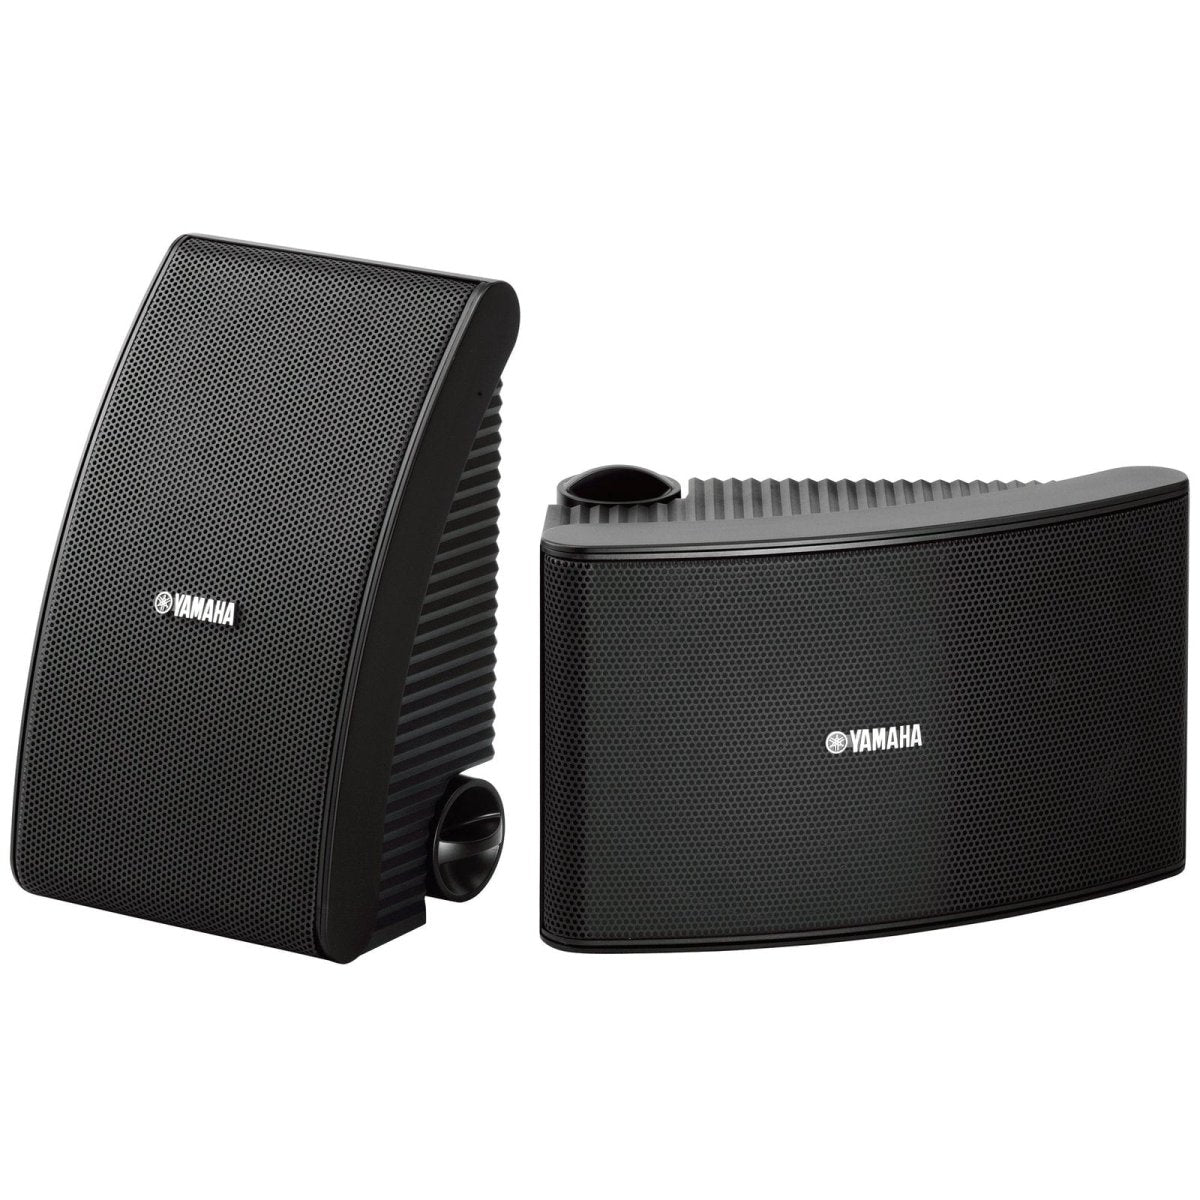 Yamaha NSAW592BLB 150W All-Weather Outdoor Speakers (Pair) - Black - Atlantic Electrics